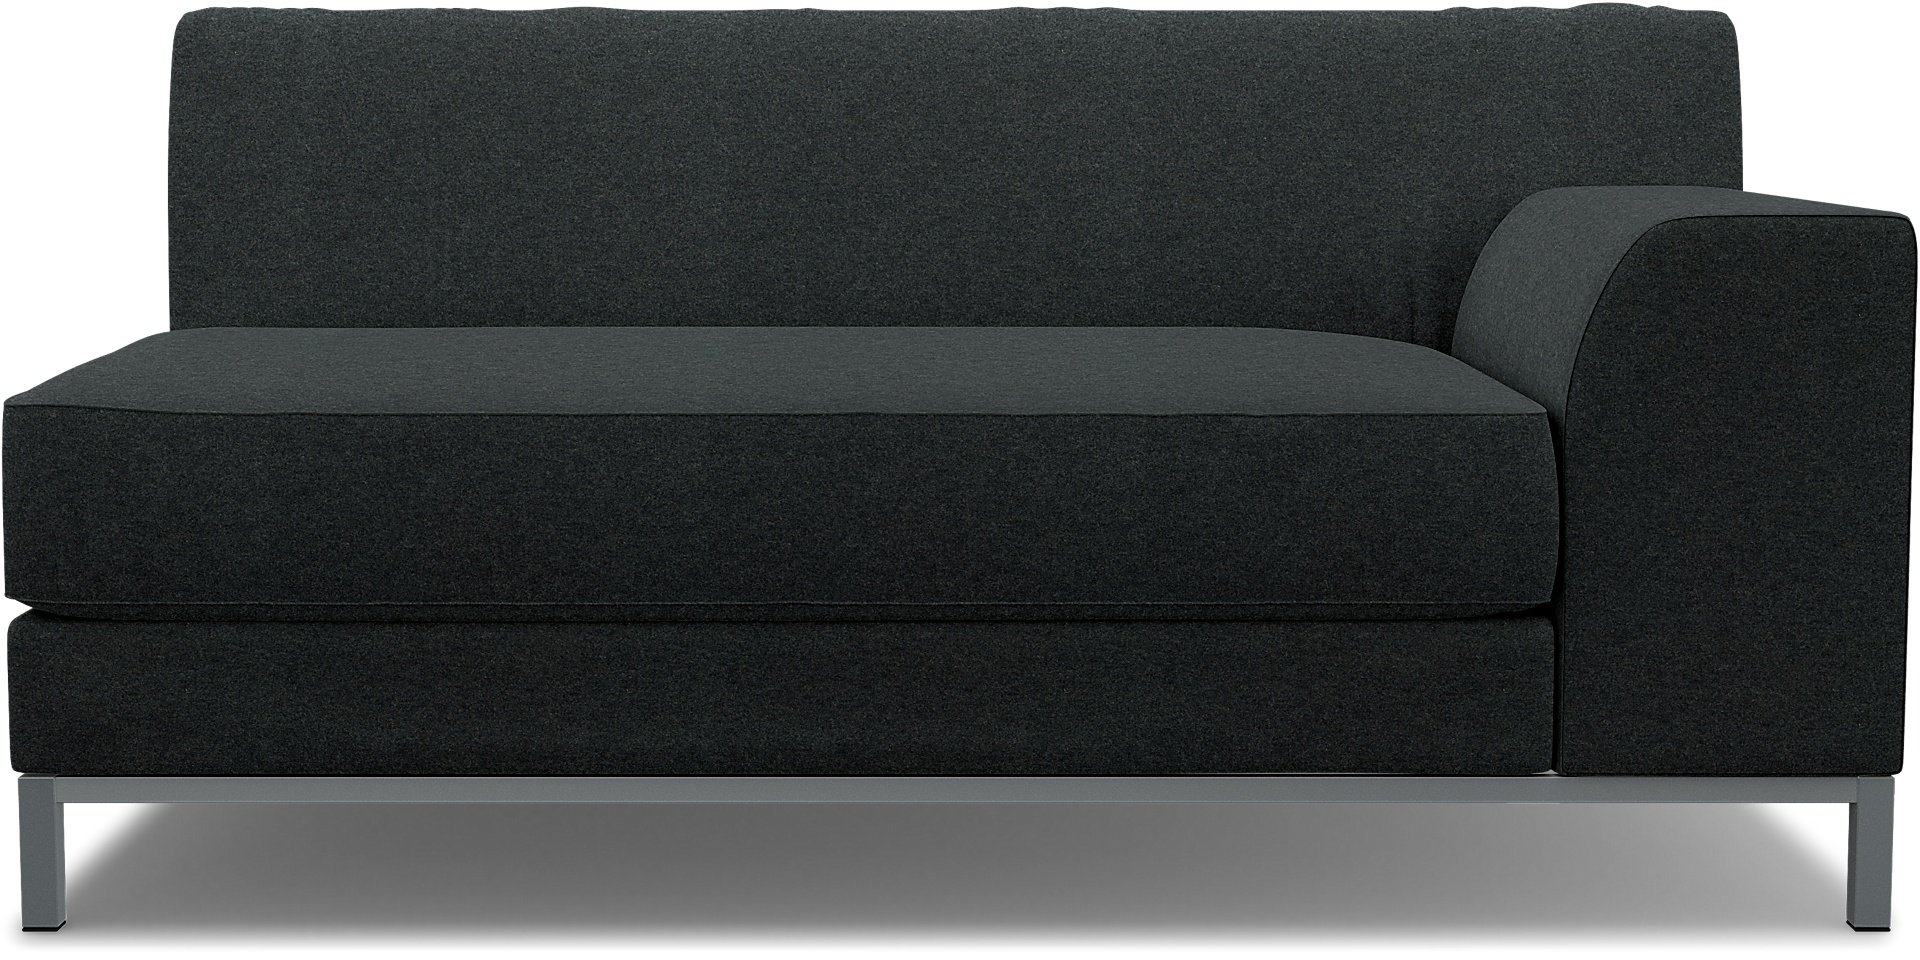 IKEA - Kramfors 2 Seater Sofa with Right Arm Cover, Stone, Wool - Bemz